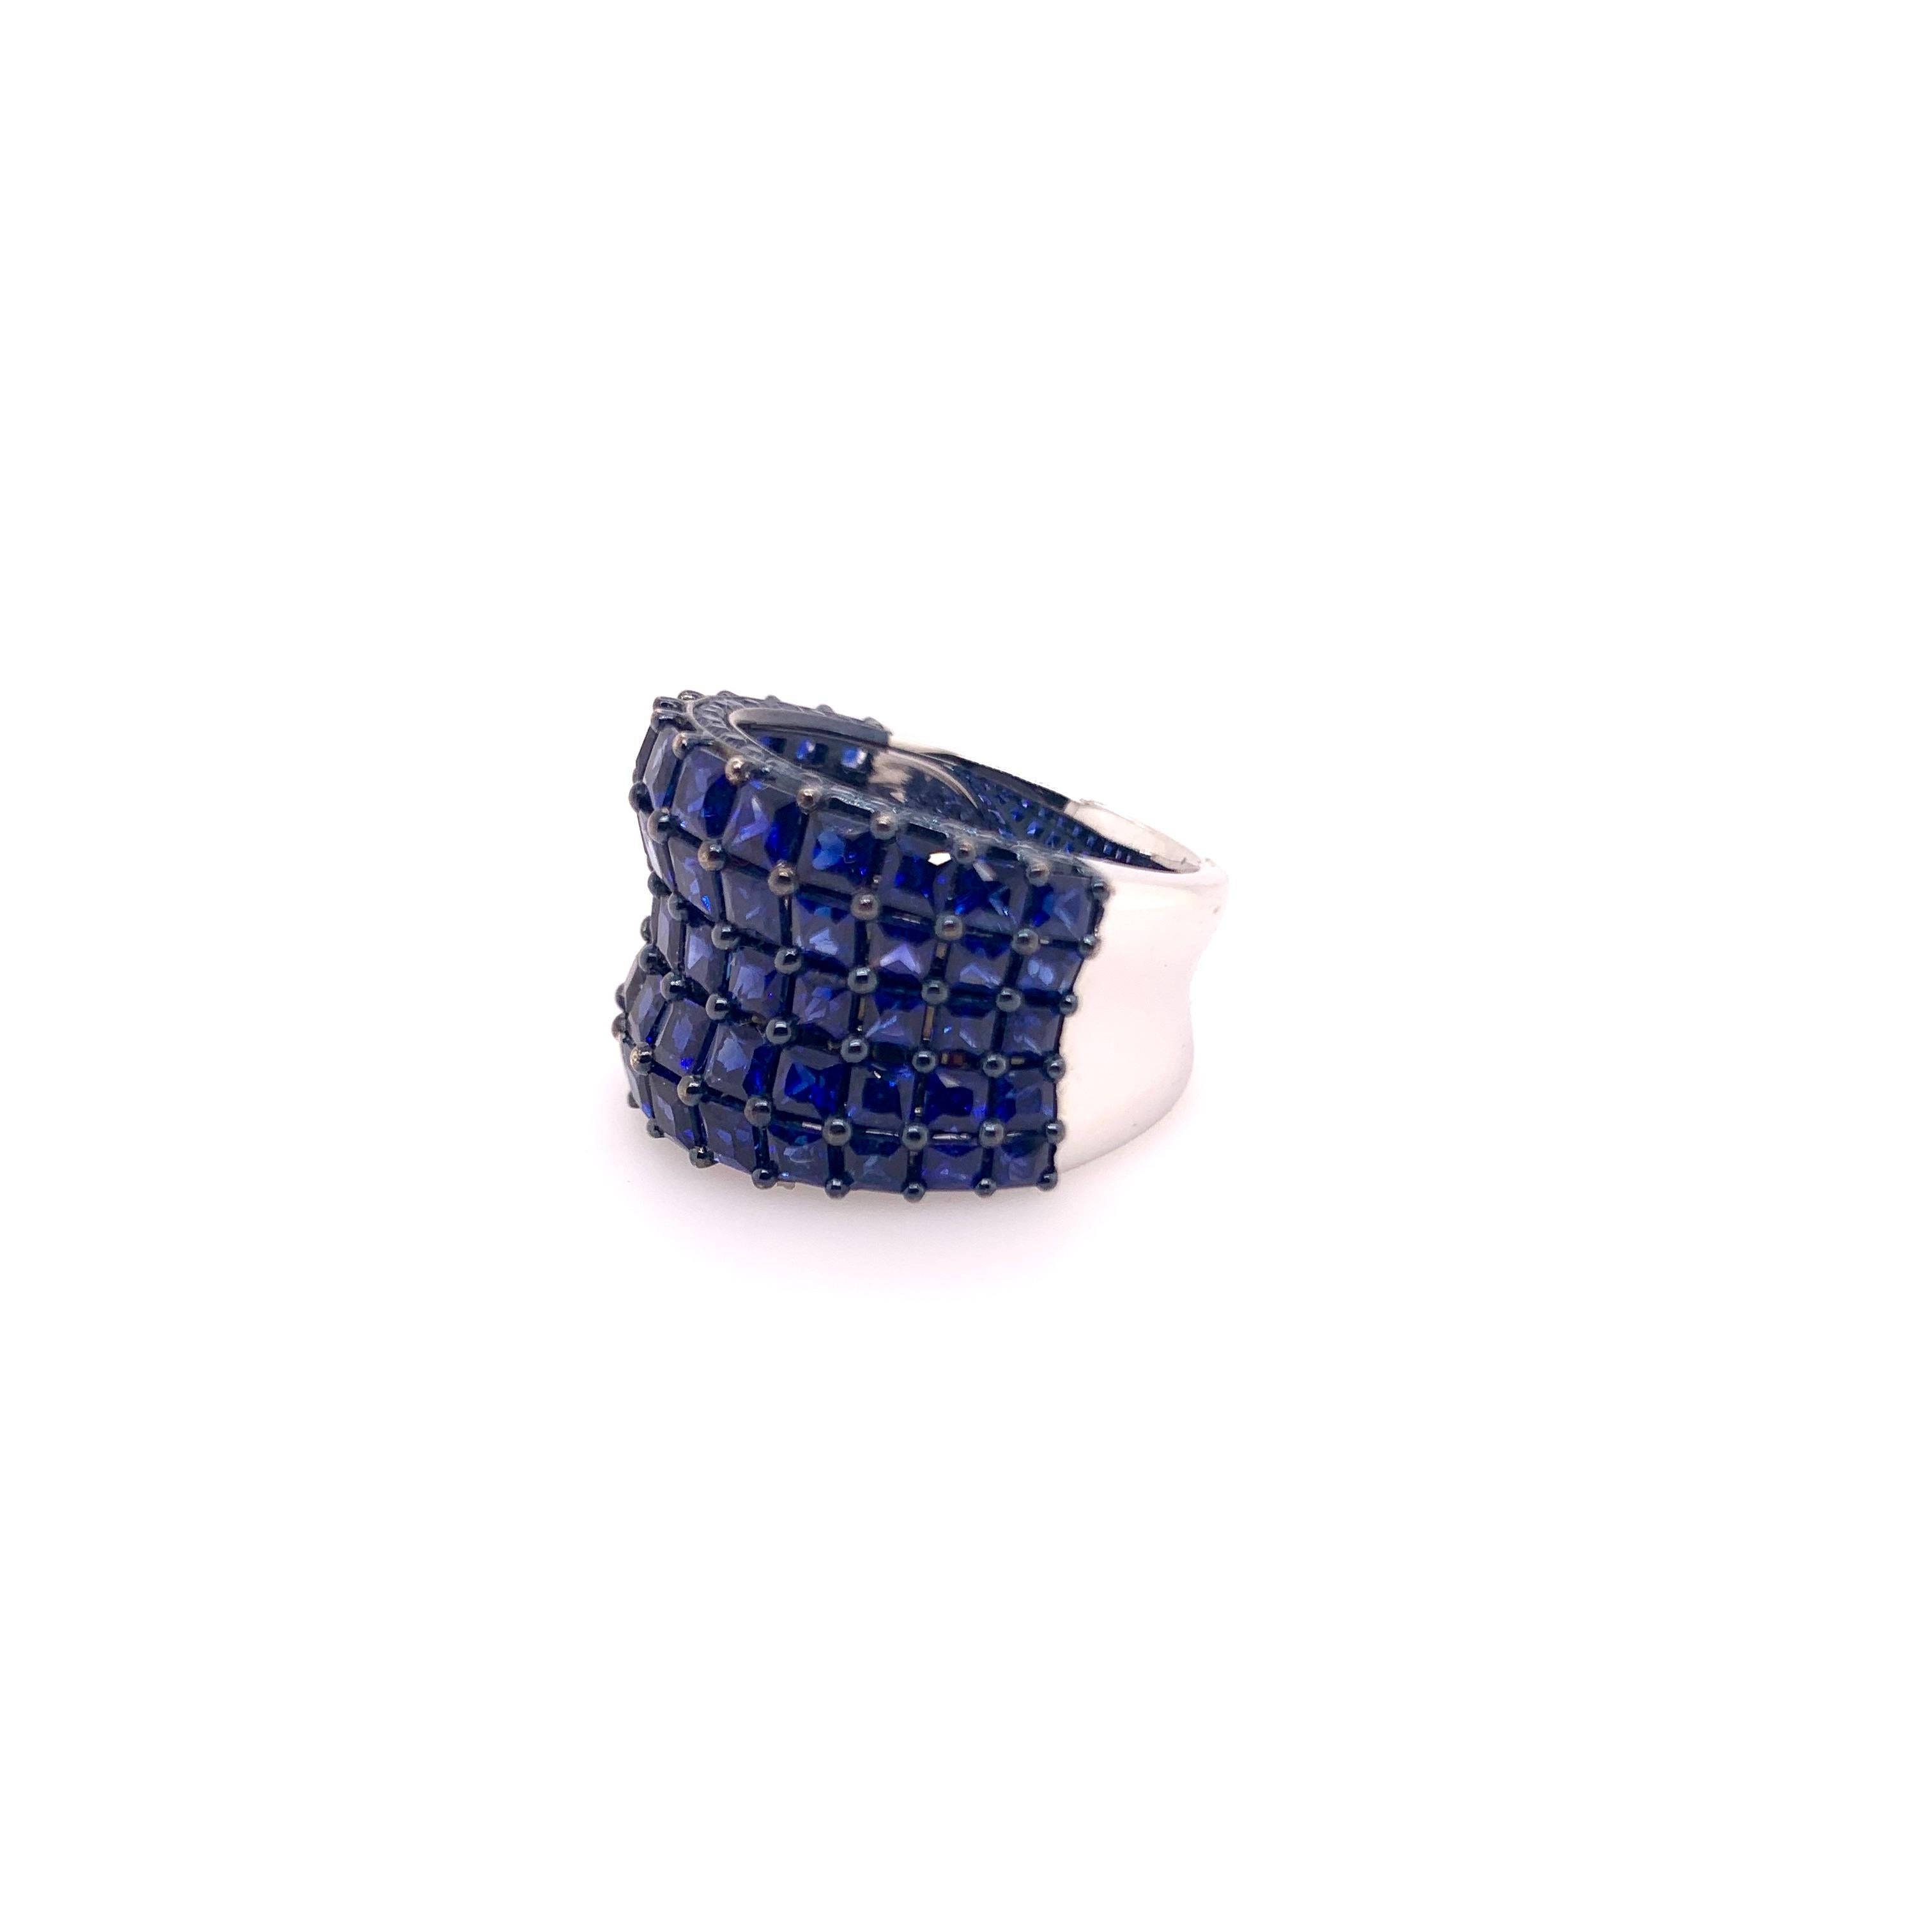 Square Cut Royal Blue Sapphire Cigar Band Cocktail Ring in 18k White Gold